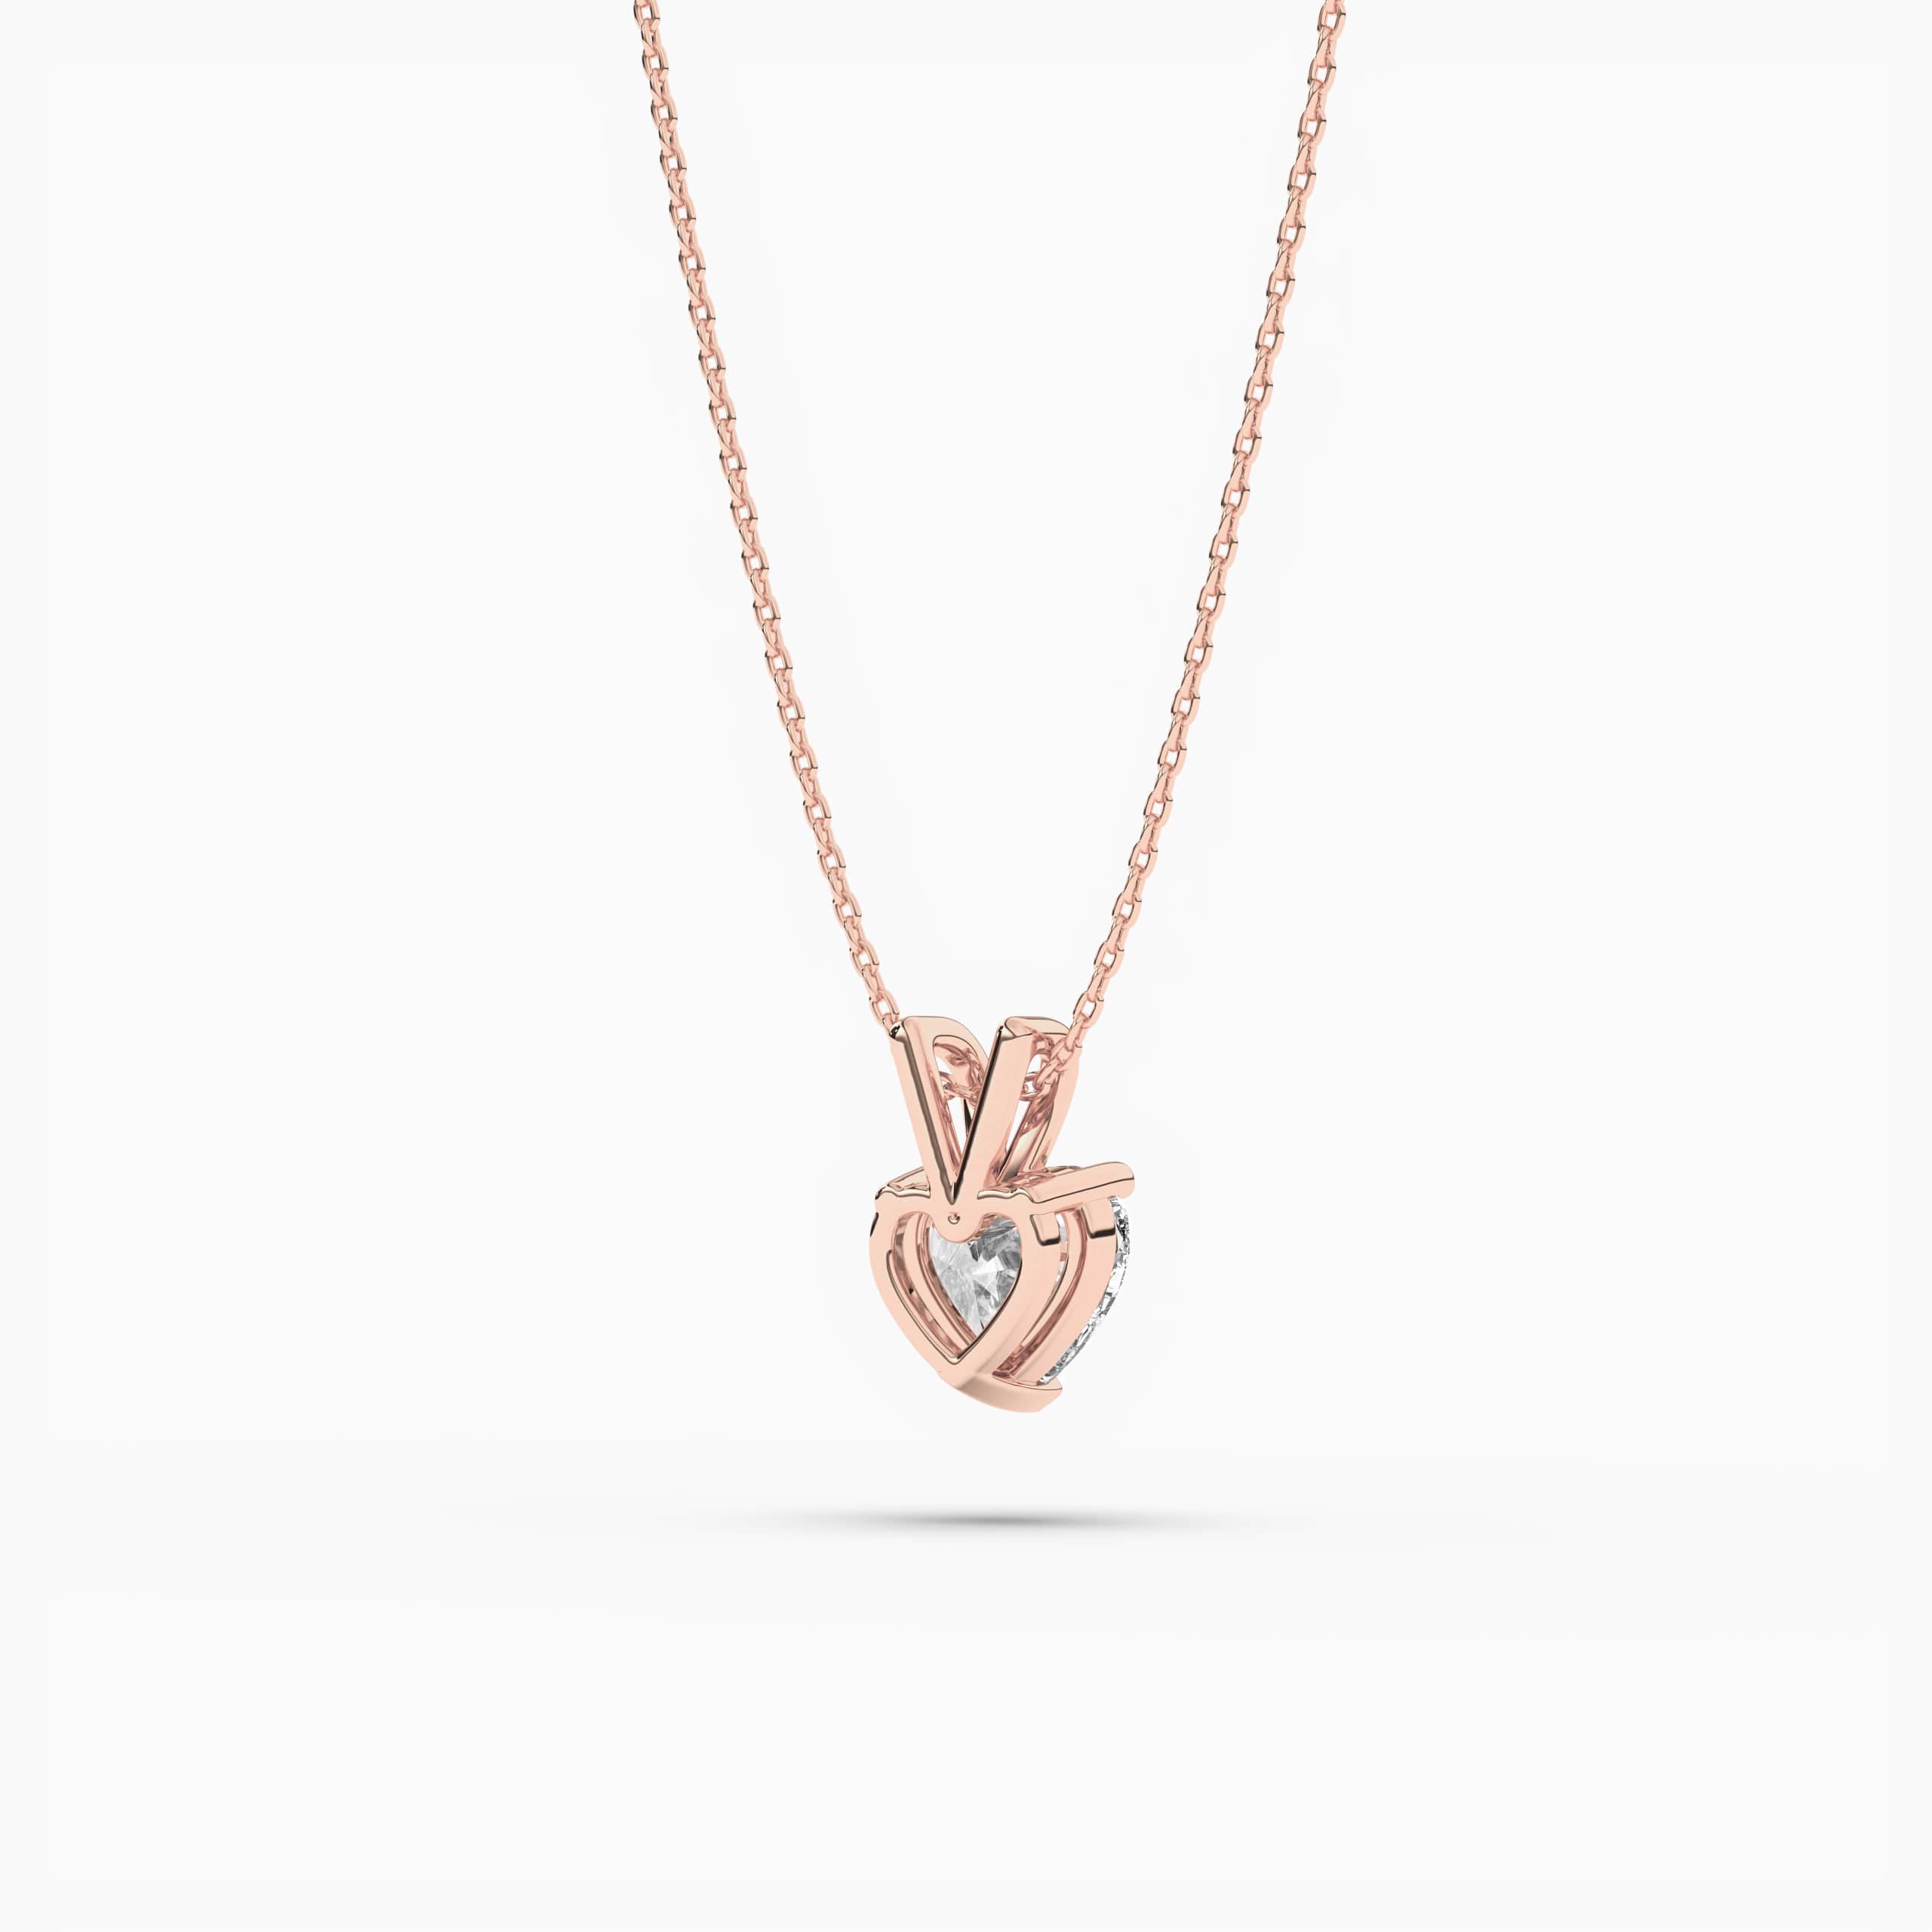 NECKLACE HEART ZIRCONIA ROSE GOLD